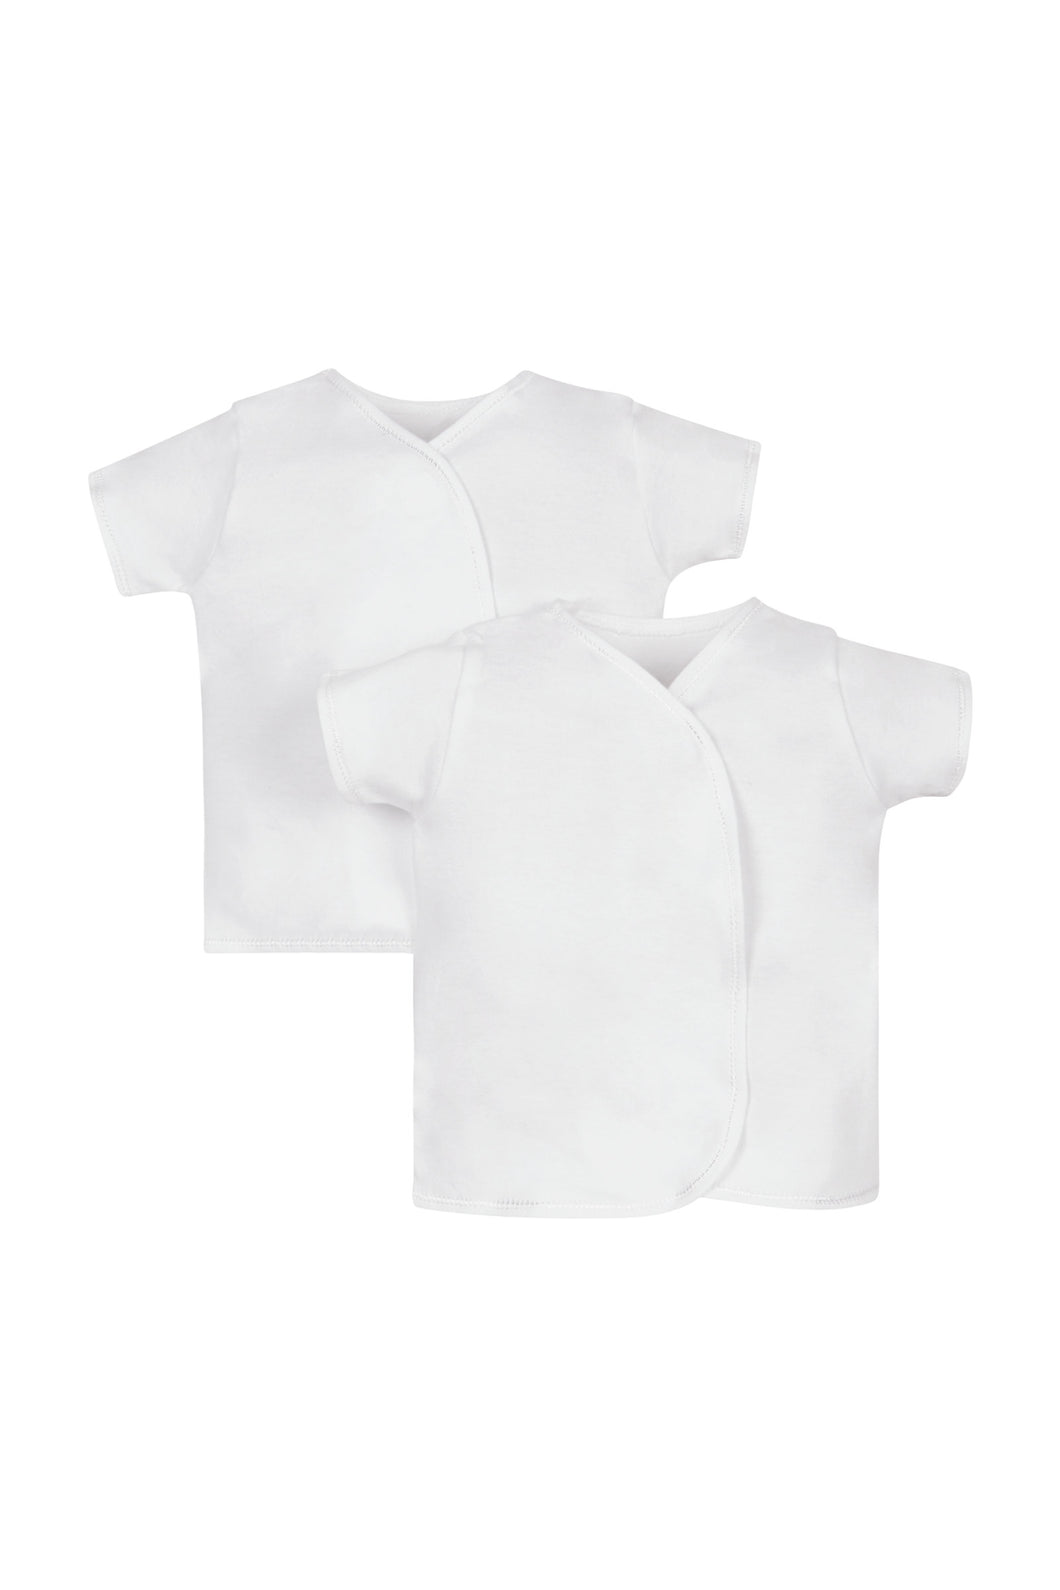 Mothercare My First Short Sleeve Wrap Vests - 2 Pack